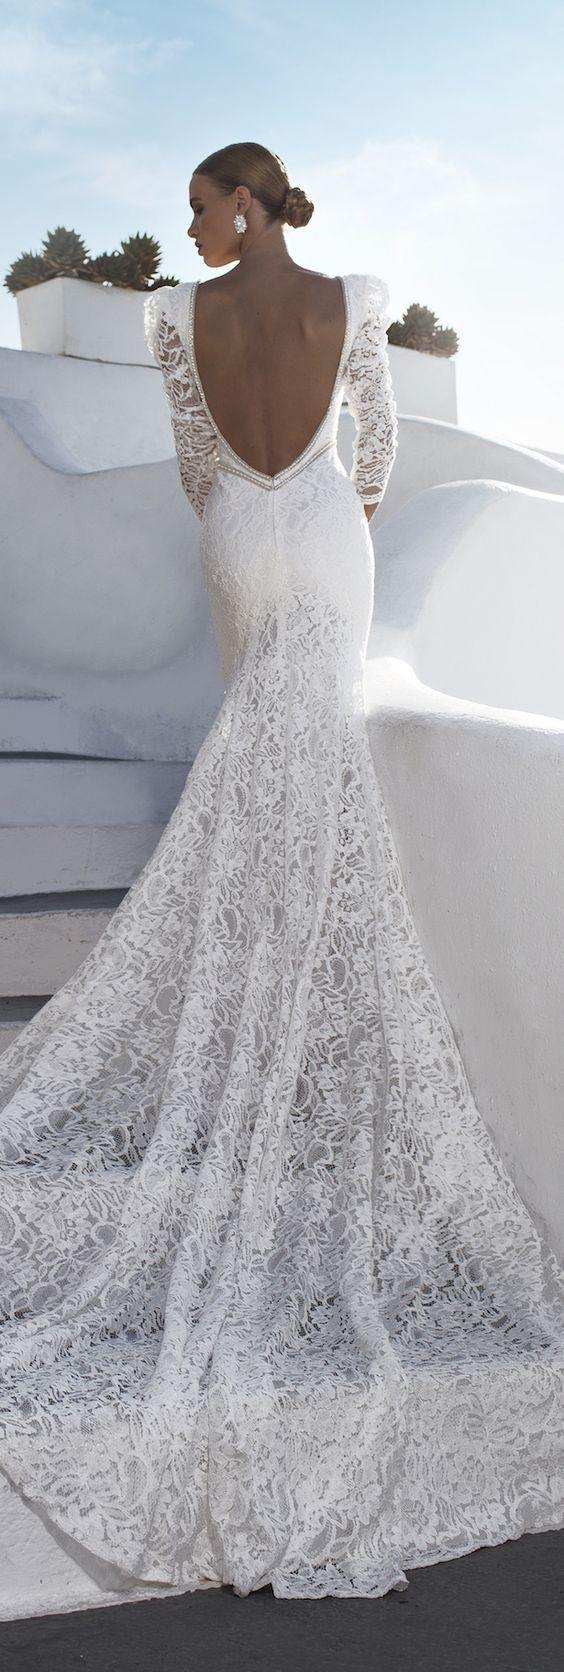 Wedding - 50 Beautiful Lace Wedding Dresses To Die For